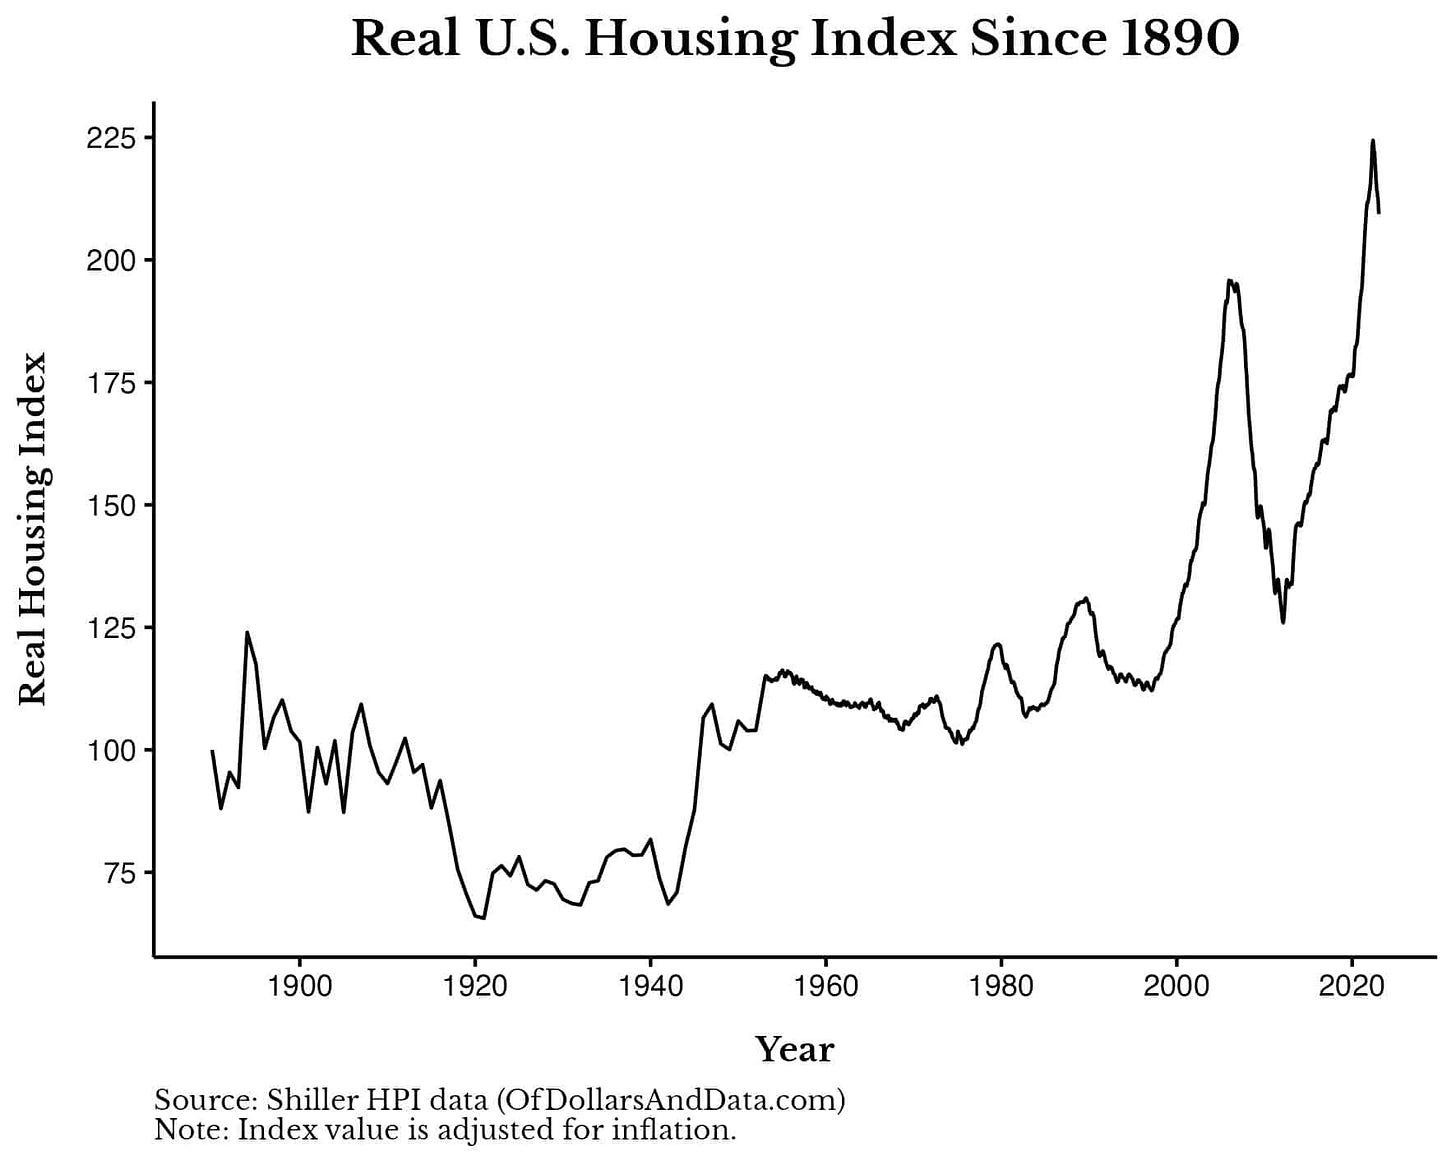 Chart of the U.S. housing index since 1890 from Robert Shiller. The data is adjusted for inflation and helps visualize "why are houses so expensive?"